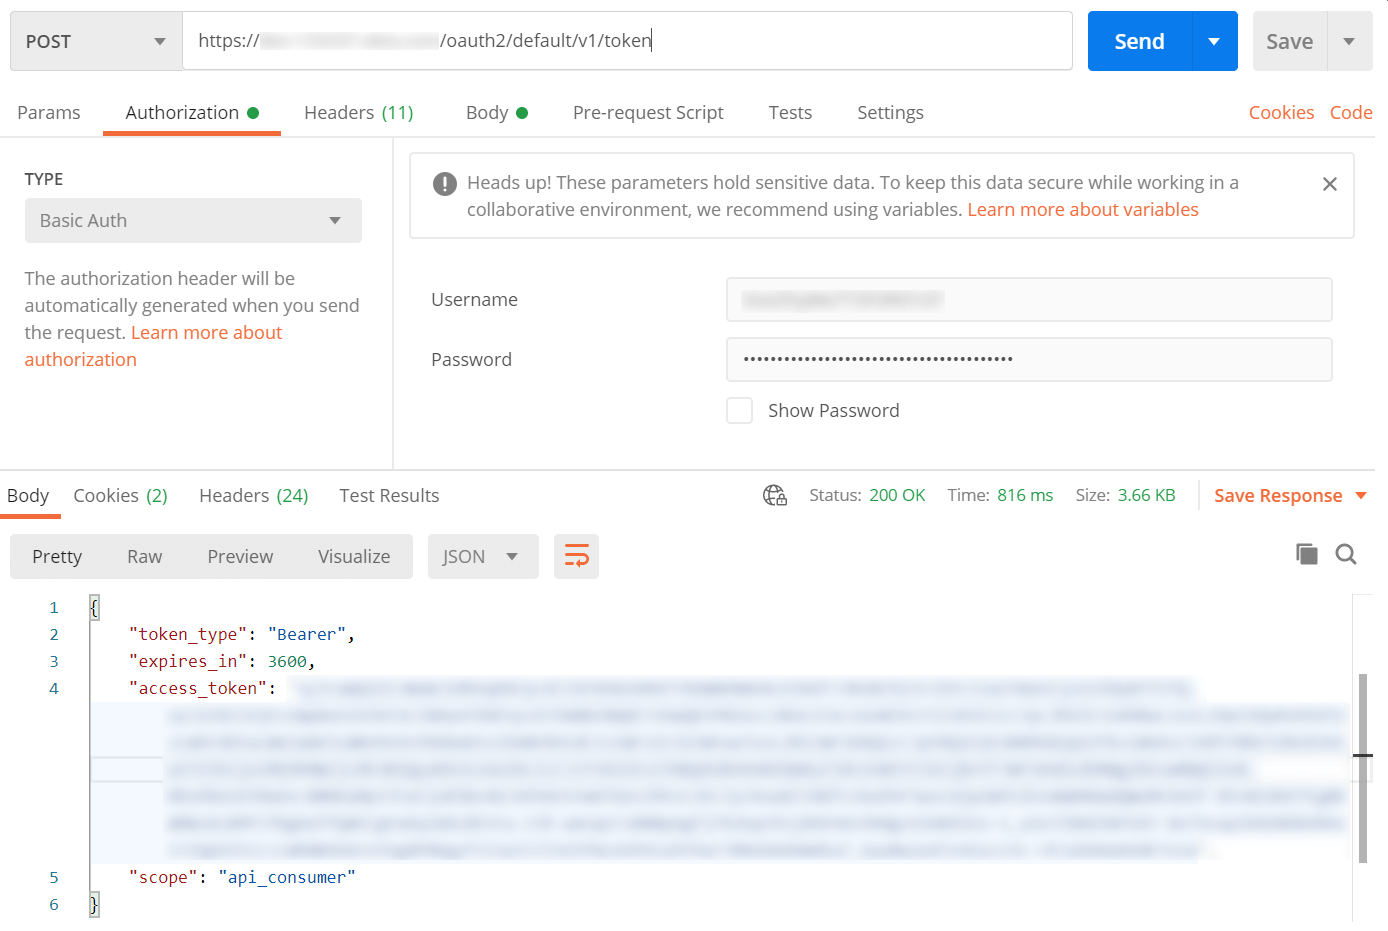 Postman showing a response to a token request including an access token